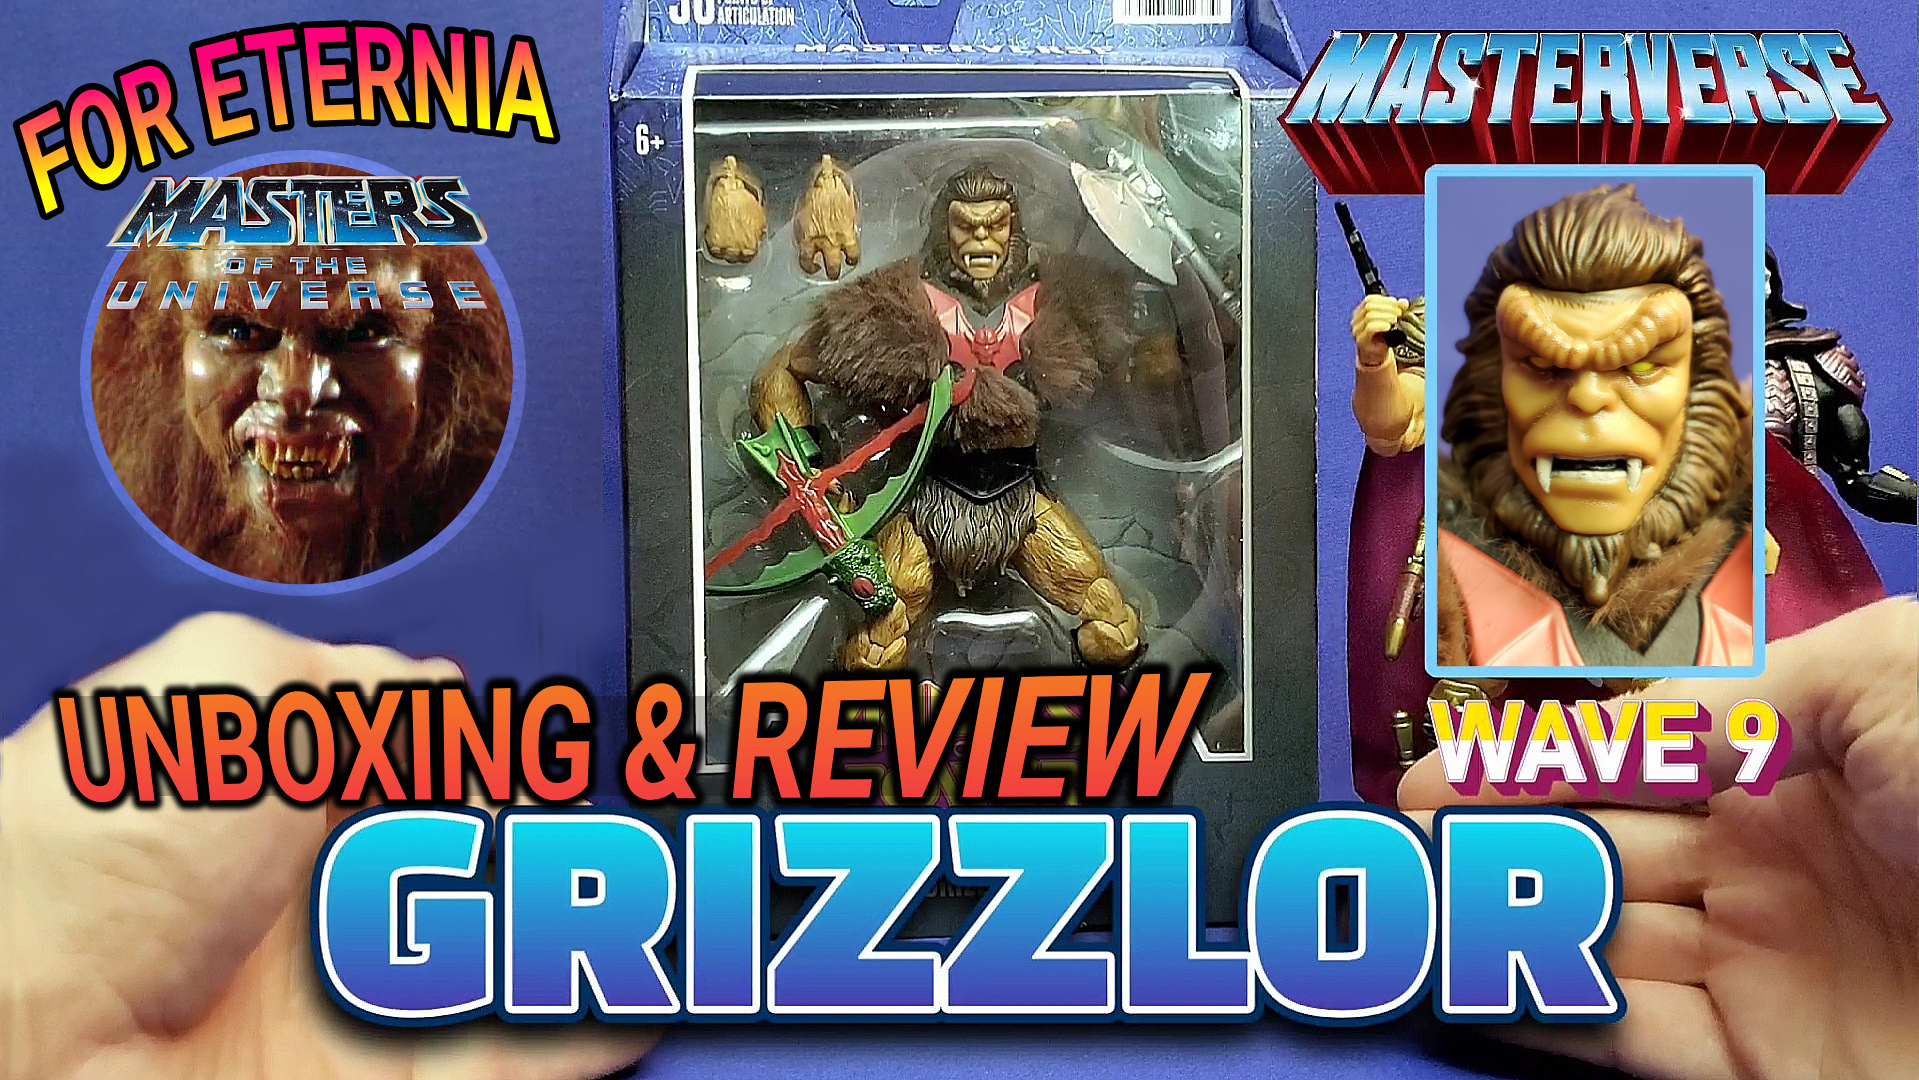 Watch our UNBOXING & REVIEW of the MASTERVERSE Grizzlor Wave 9 Princess of Power Figure